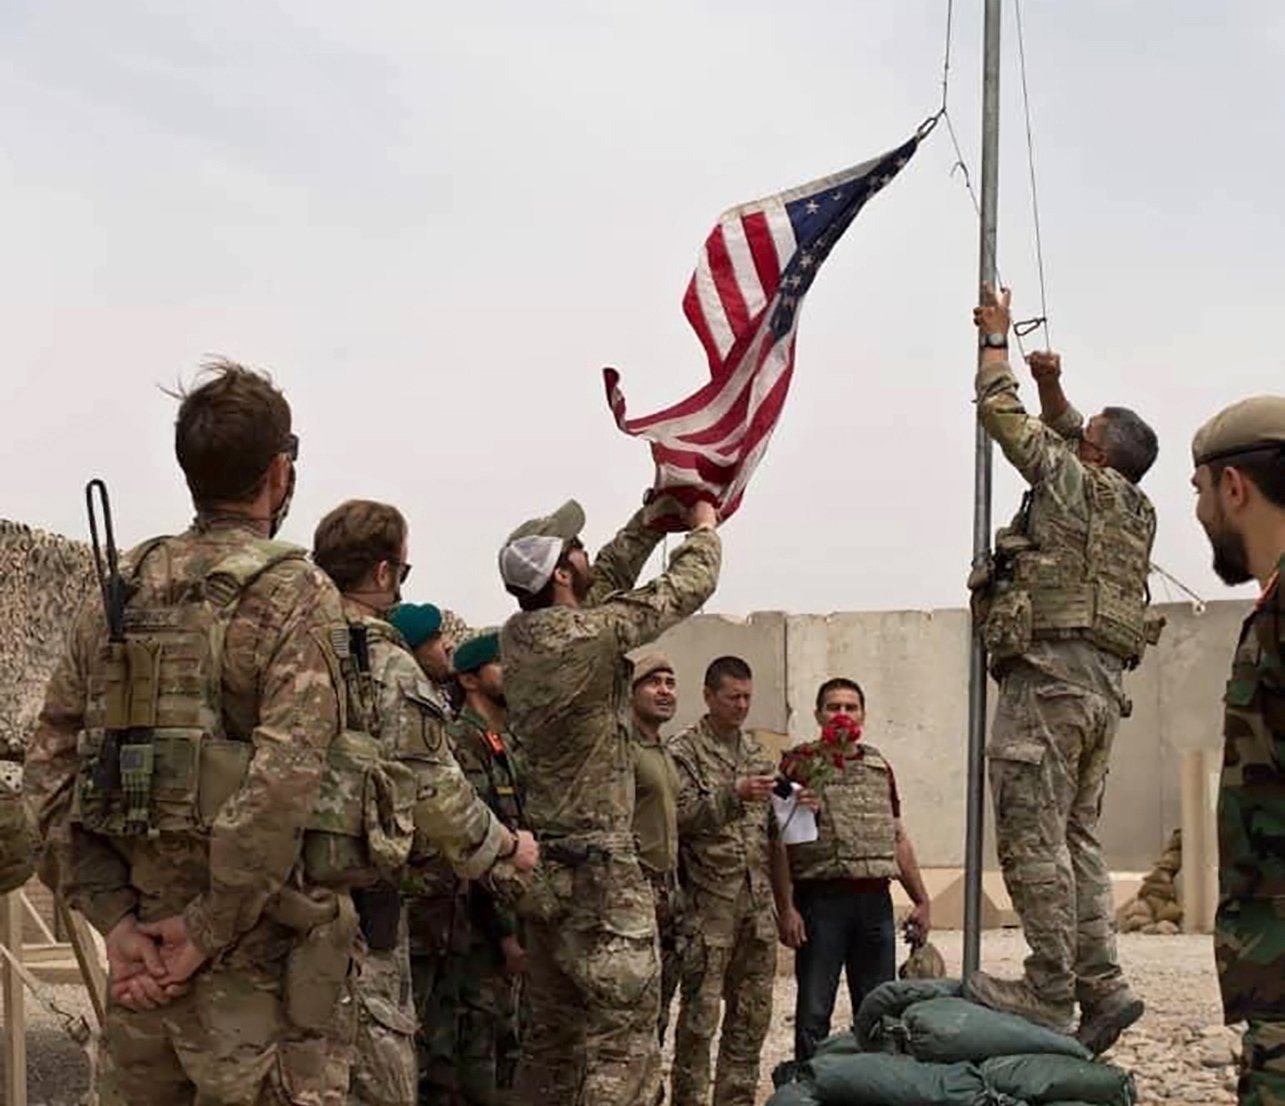 A U.S. flag is lowered as American and Afghan soldiers attend a handover ceremony from the U.S. Army to the Afghan National Army, at Camp Anthonic, in Helmand province, southern Afghanistan, May 2, 2021. (AP Photo)